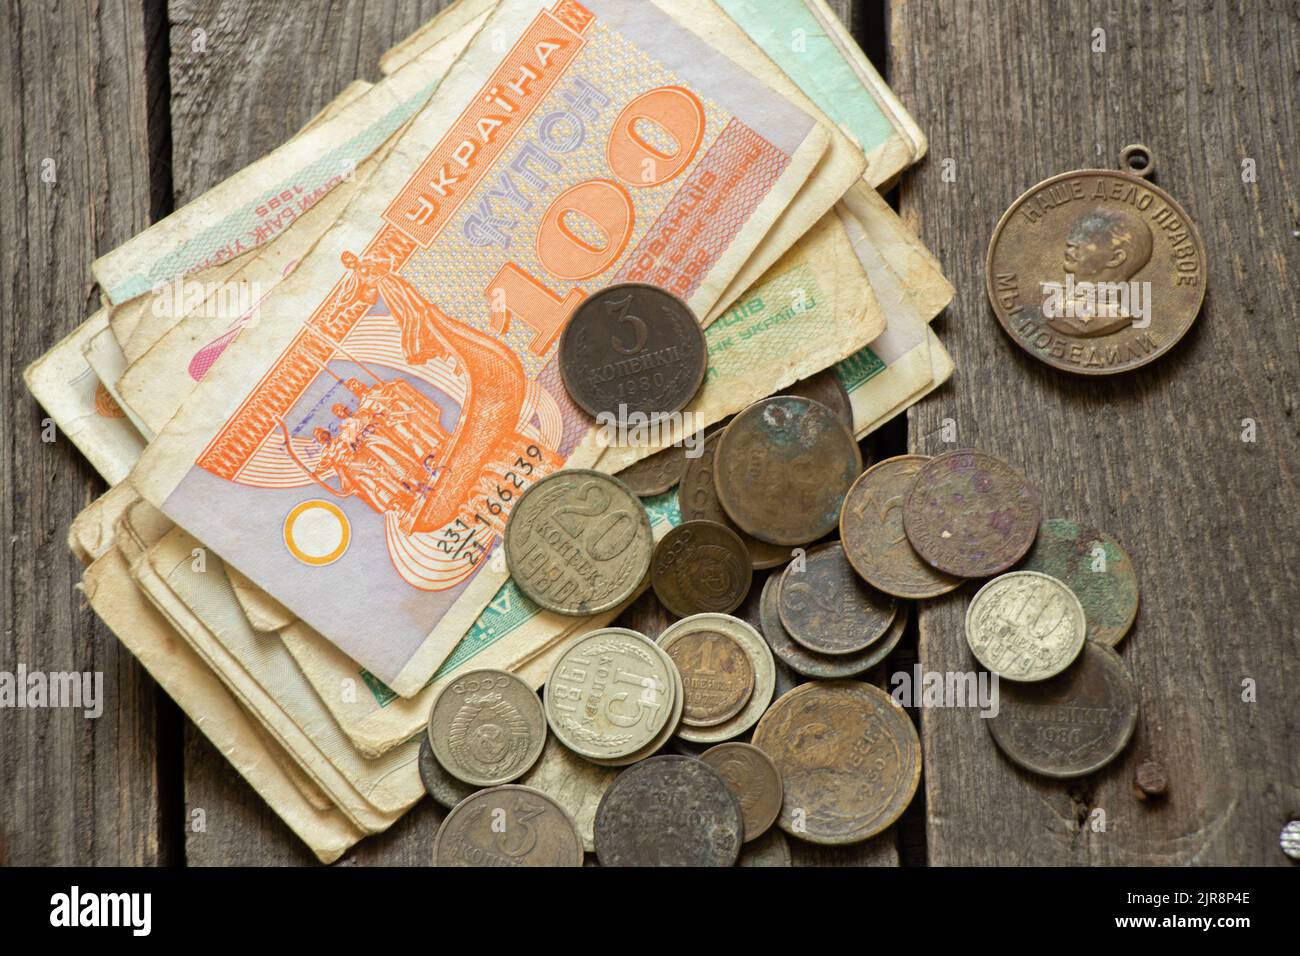 monetary unit of the Ukrainian state coupon and coins of the ussr lie on the table, old soviet money, coins and coupons, finance Stock Photo